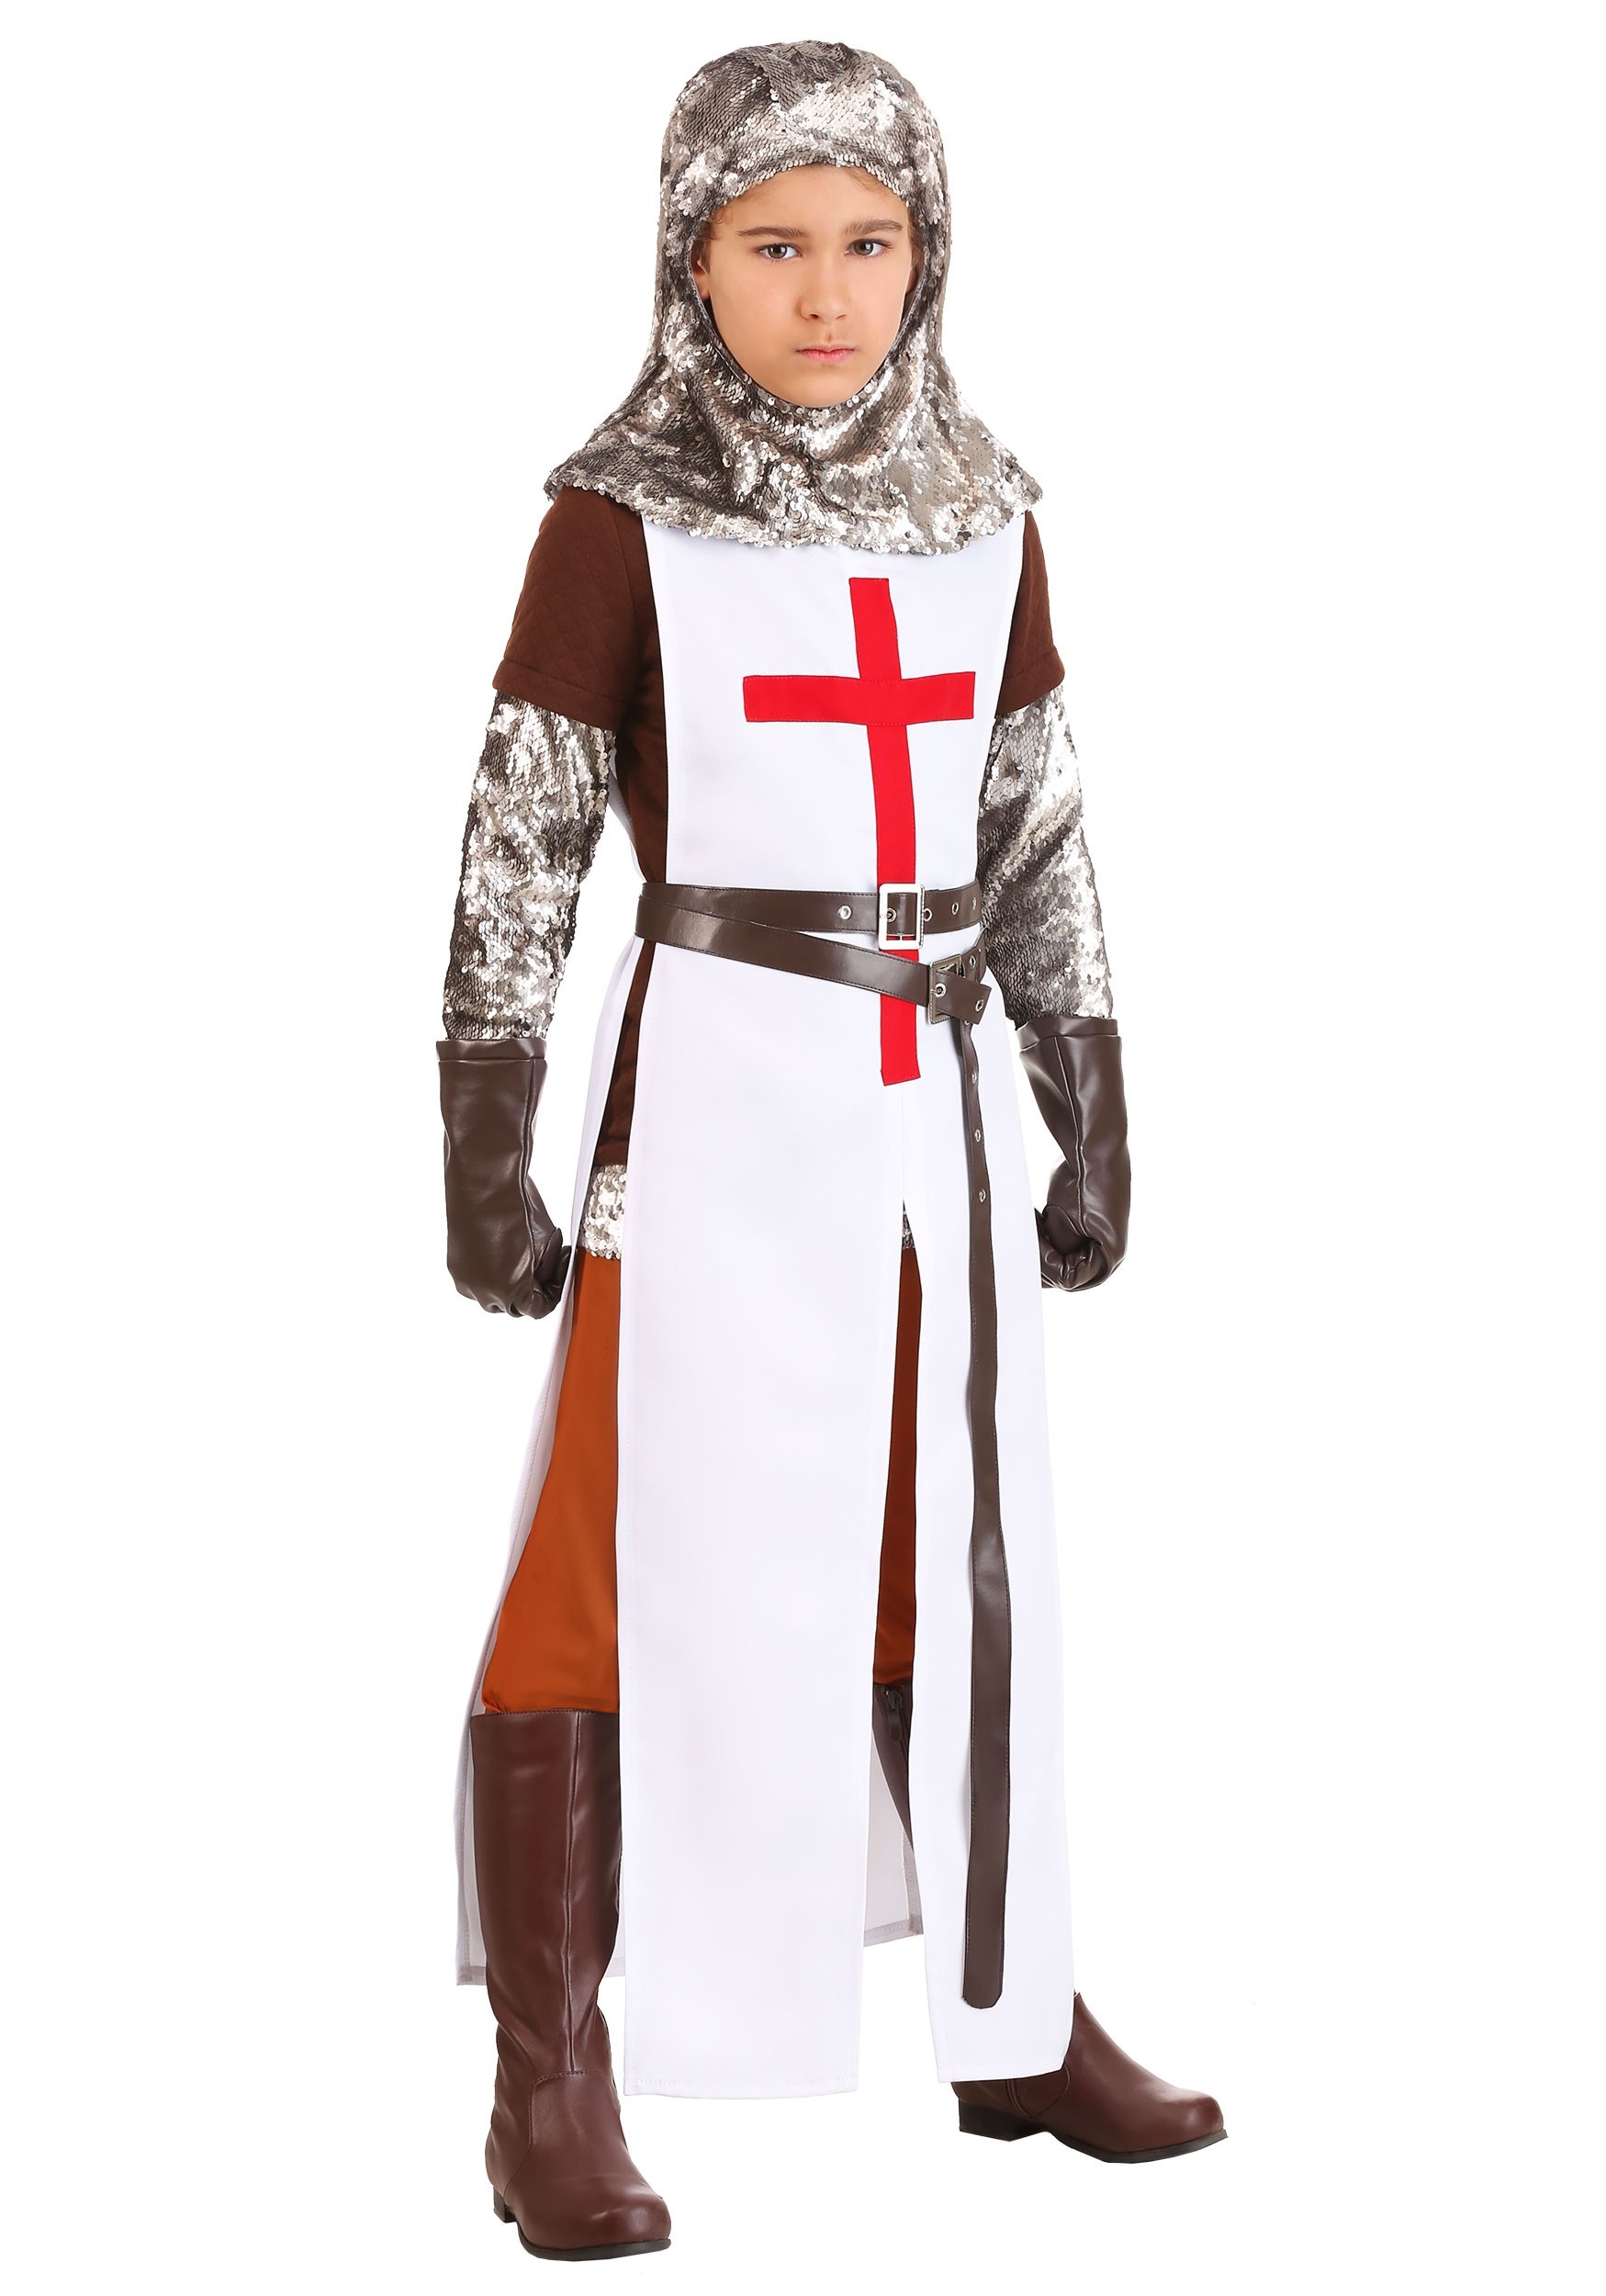 Photos - Fancy Dress Crusader FUN Costumes  Costume for Boys Brown/Gray/White 